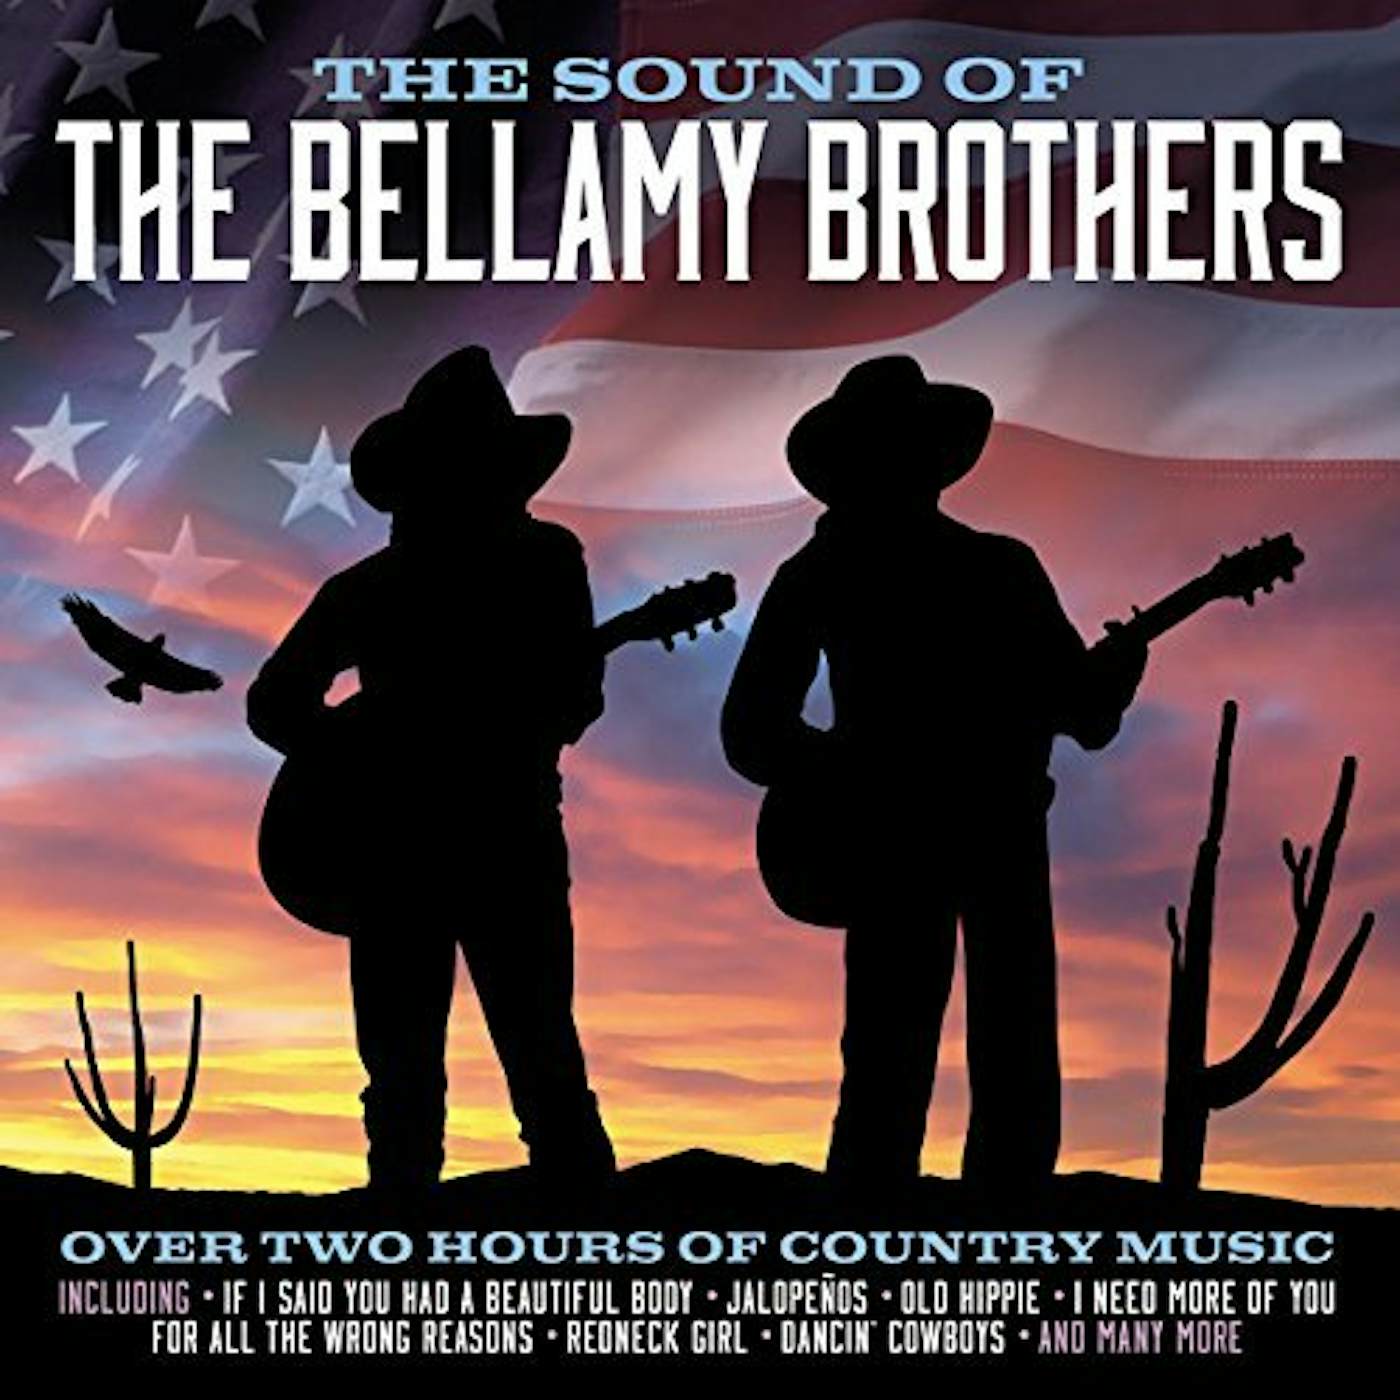 The Bellamy Brothers SOUND OF CD